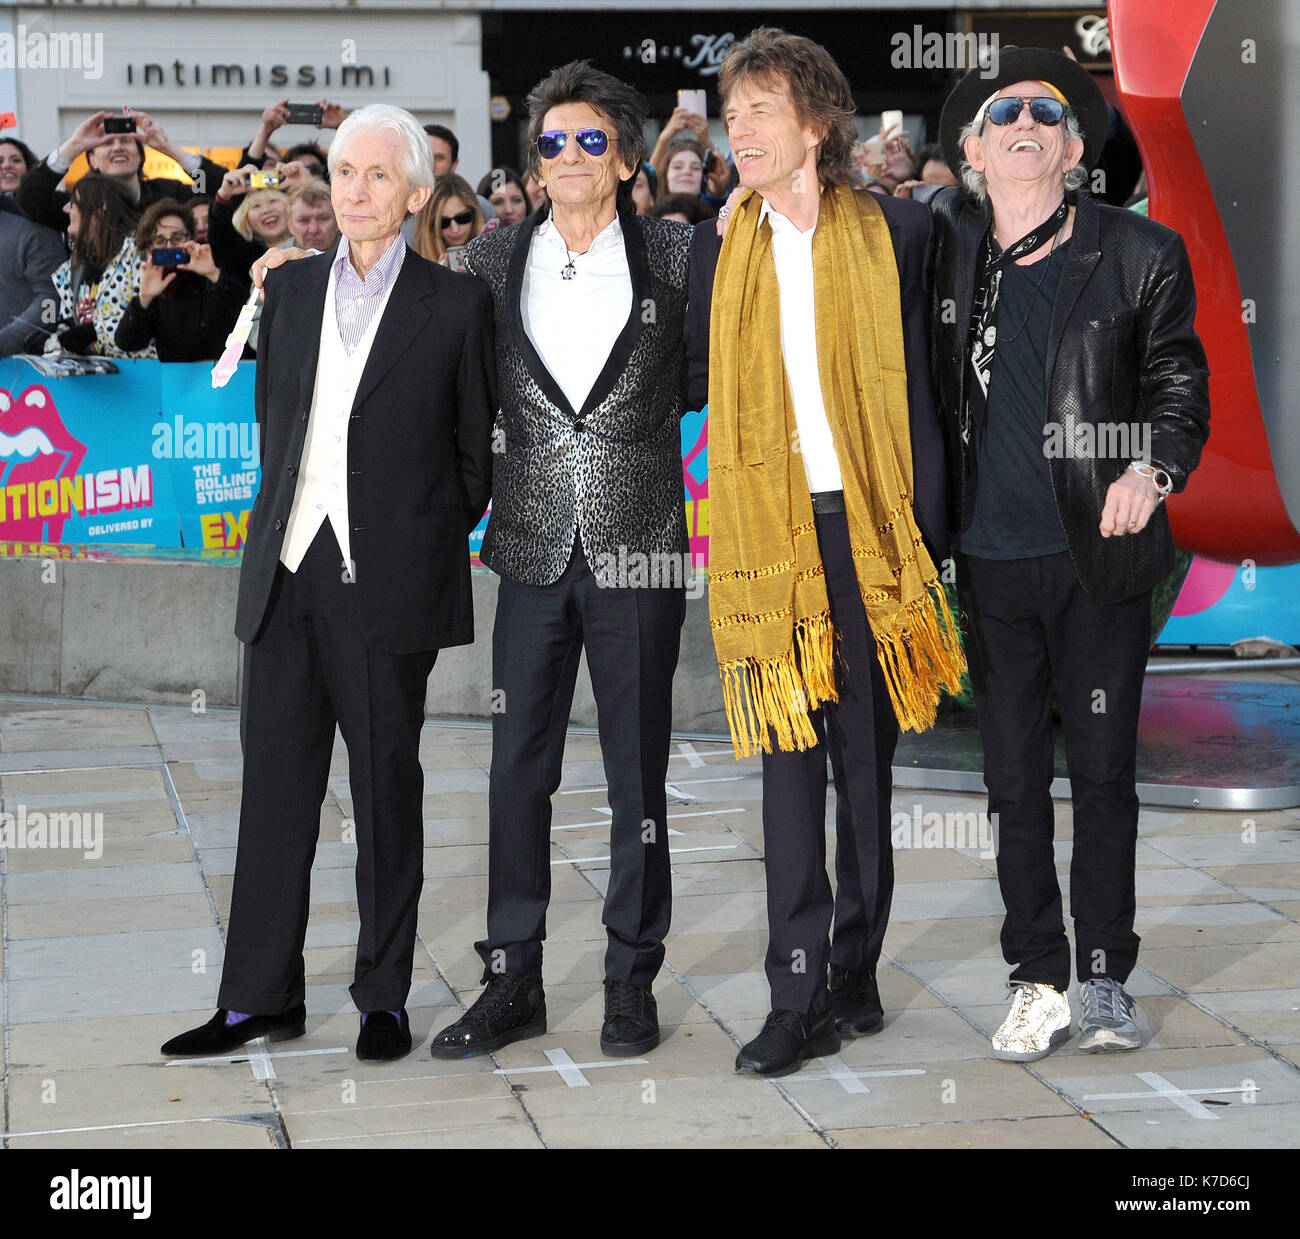 Photo Must Be Credited ©Alpha Press 078237 04/04/2016 Charlie Watts, Ronnie Wood, Mick Jagger and Keith Richards at The Rolling Stones Exhibitionism Private View Opening Night Gala held at the Saatchi Gallery in London. Stock Photo